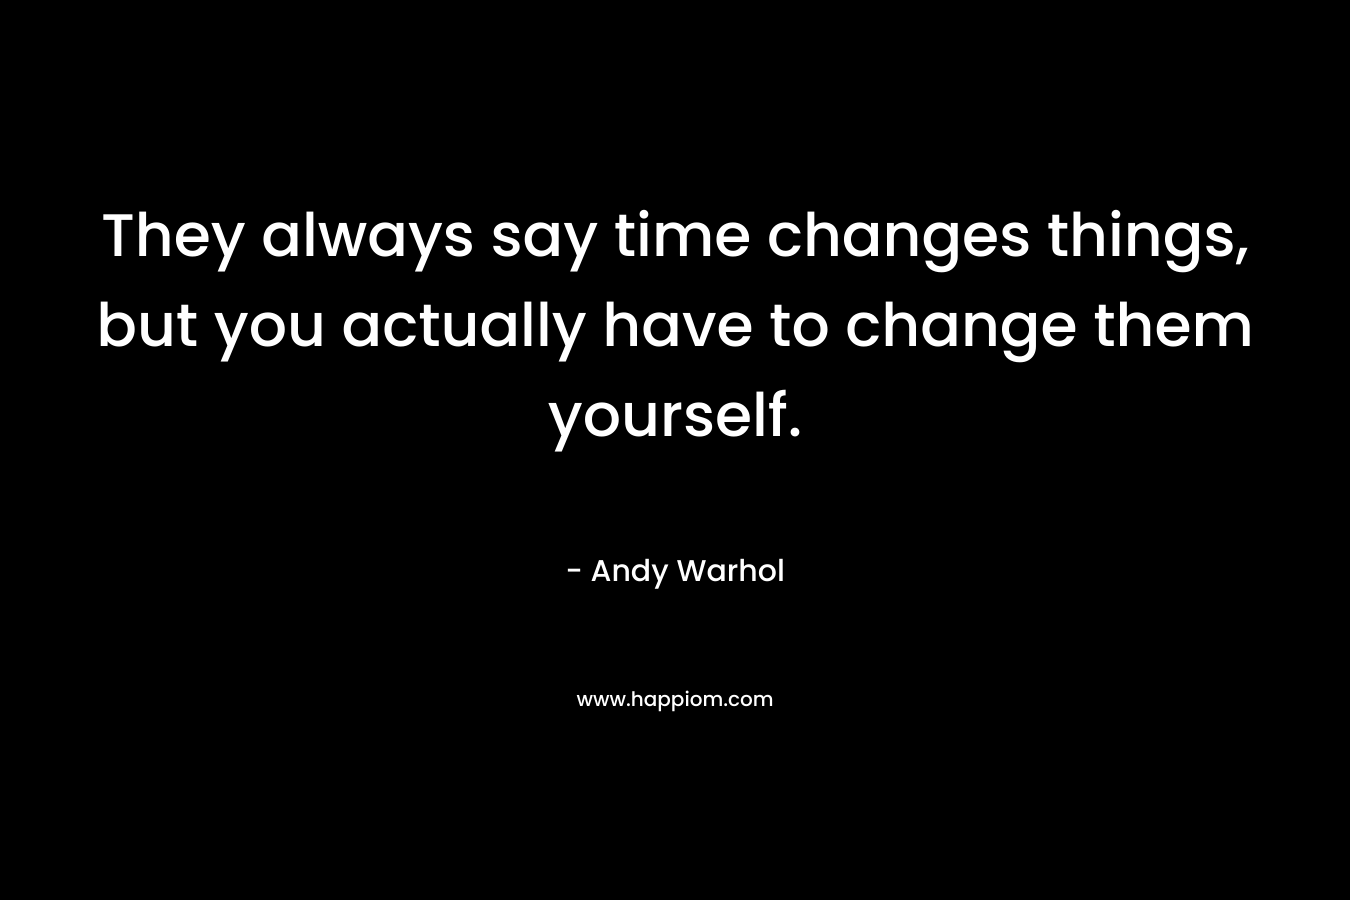 They always say time changes things, but you actually have to change them yourself.